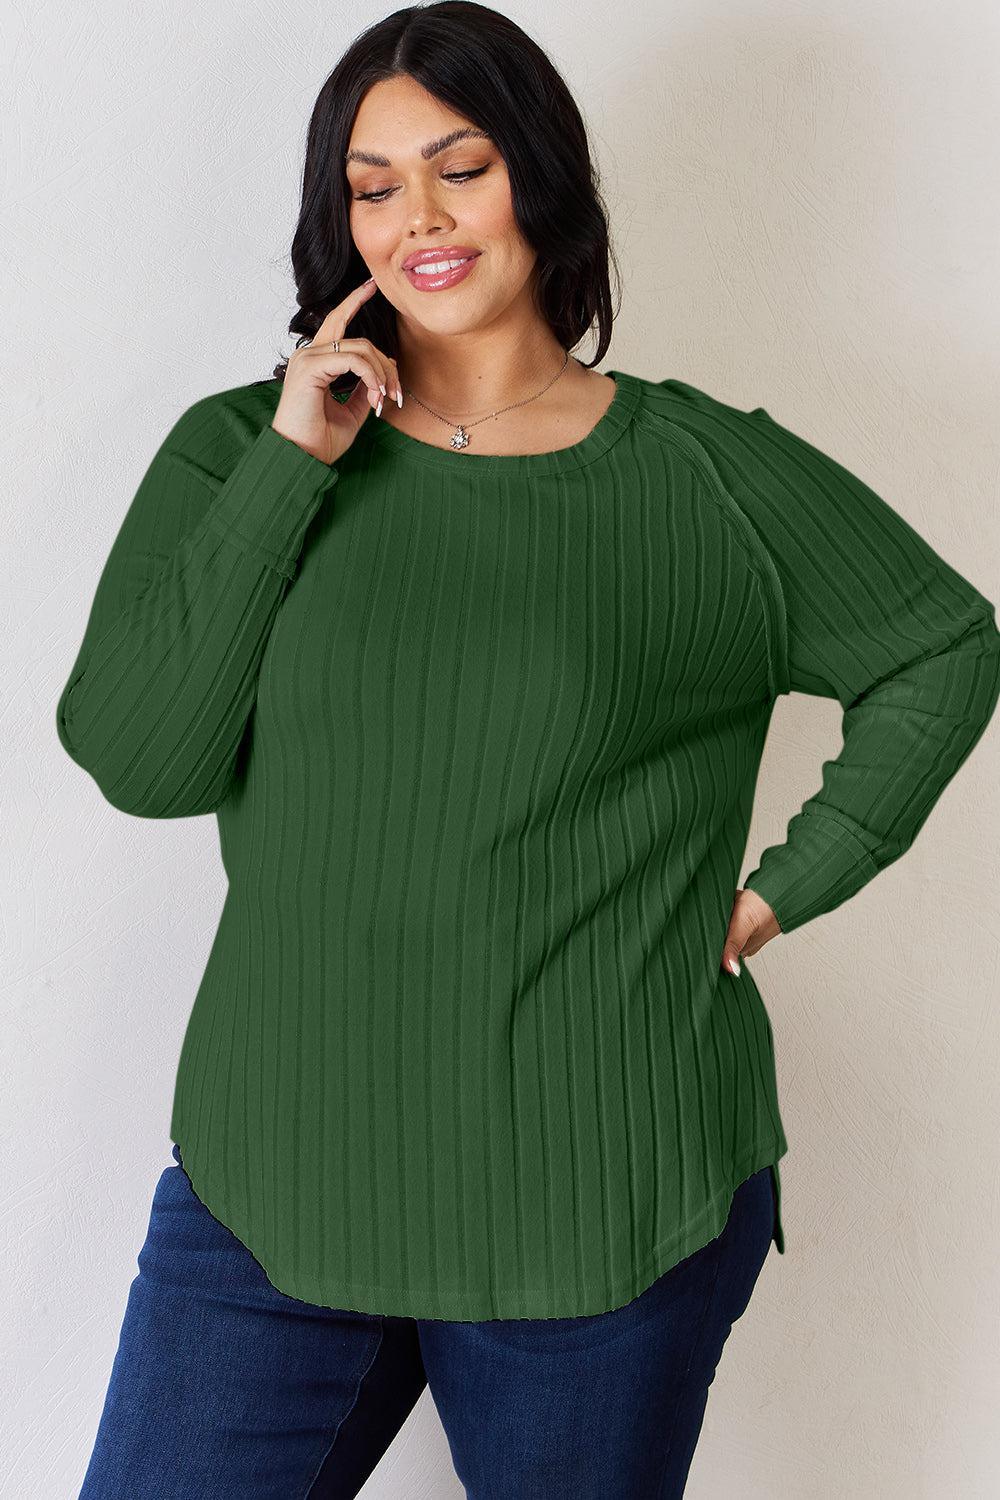 a woman in a green sweater is talking on her cell phone